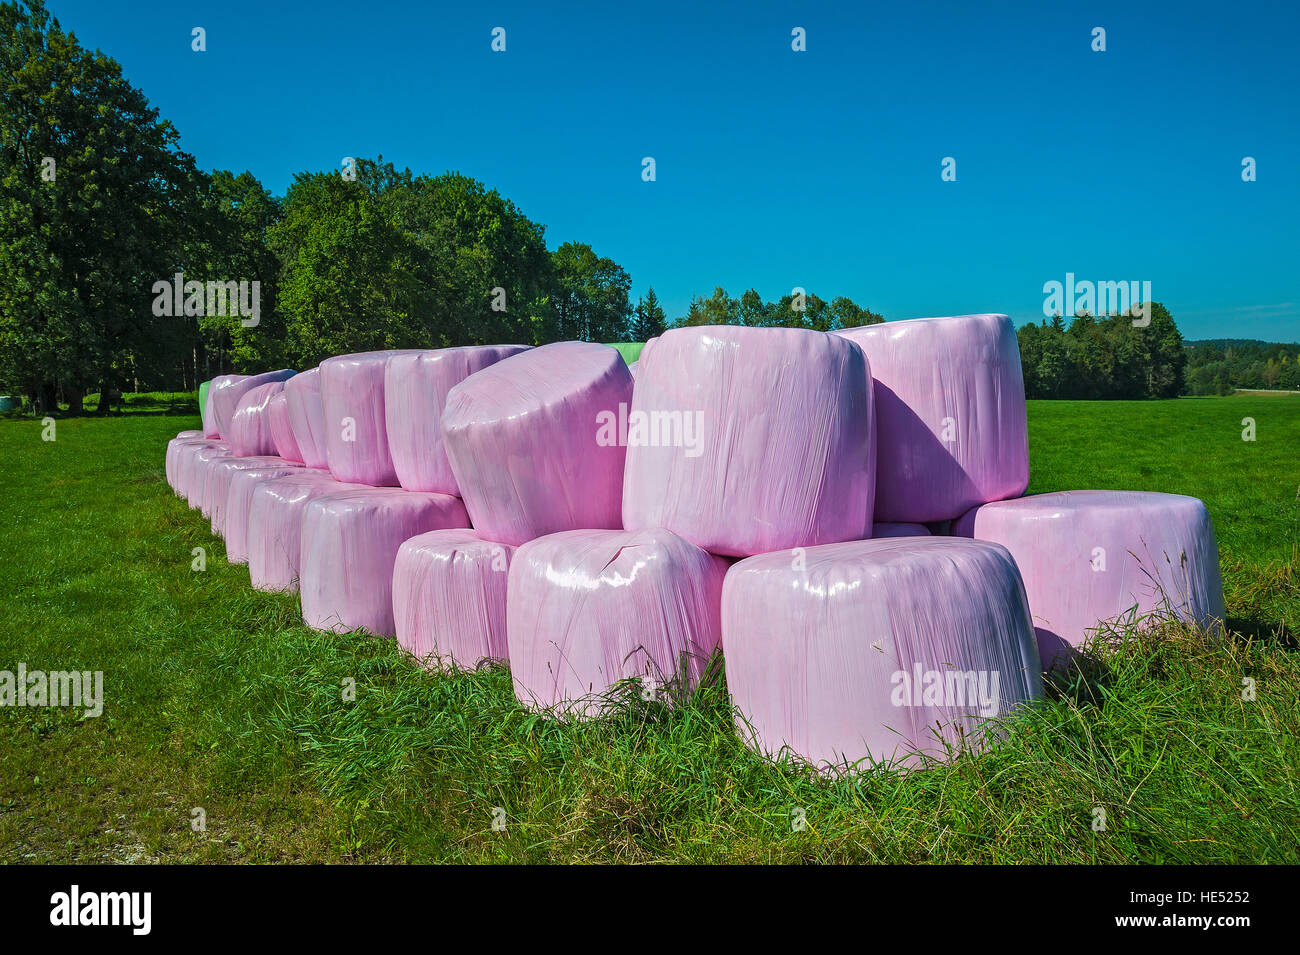 Silage bales in pink plastic wrap, Bavaria, Germany Stock Photo